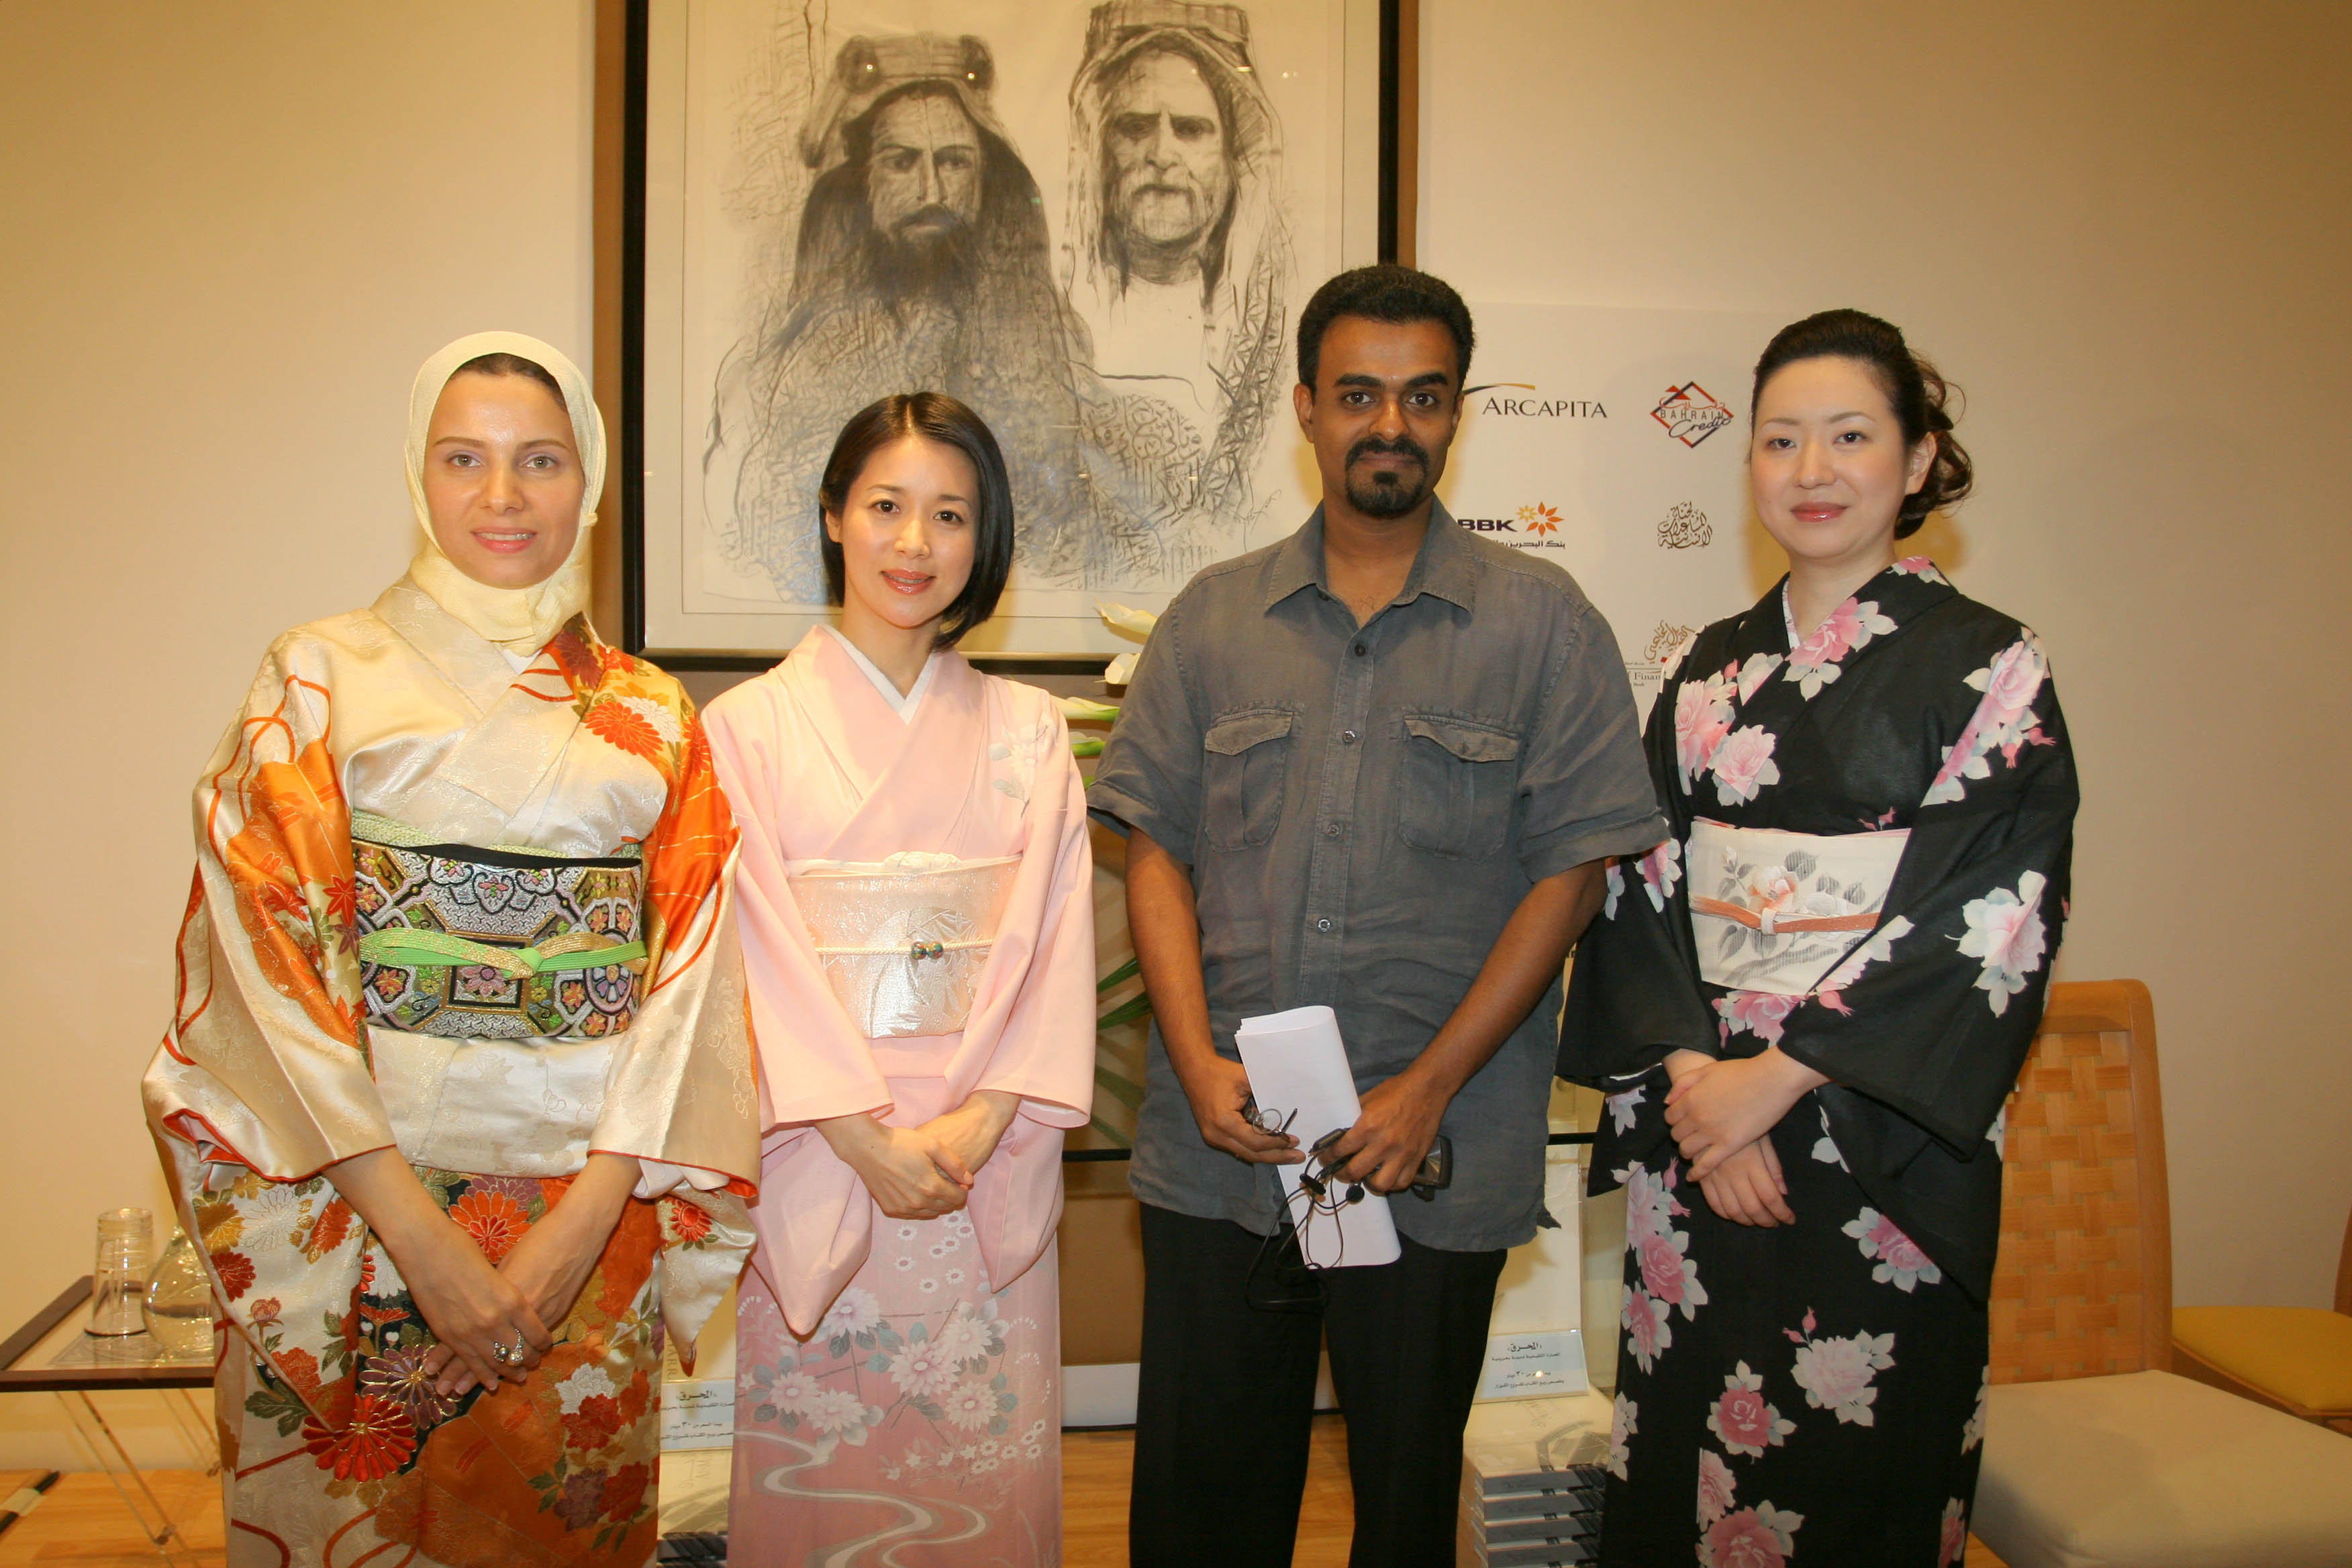 Haddad with the poet Madoka Mayozumi after her reading in Bahrain 2009